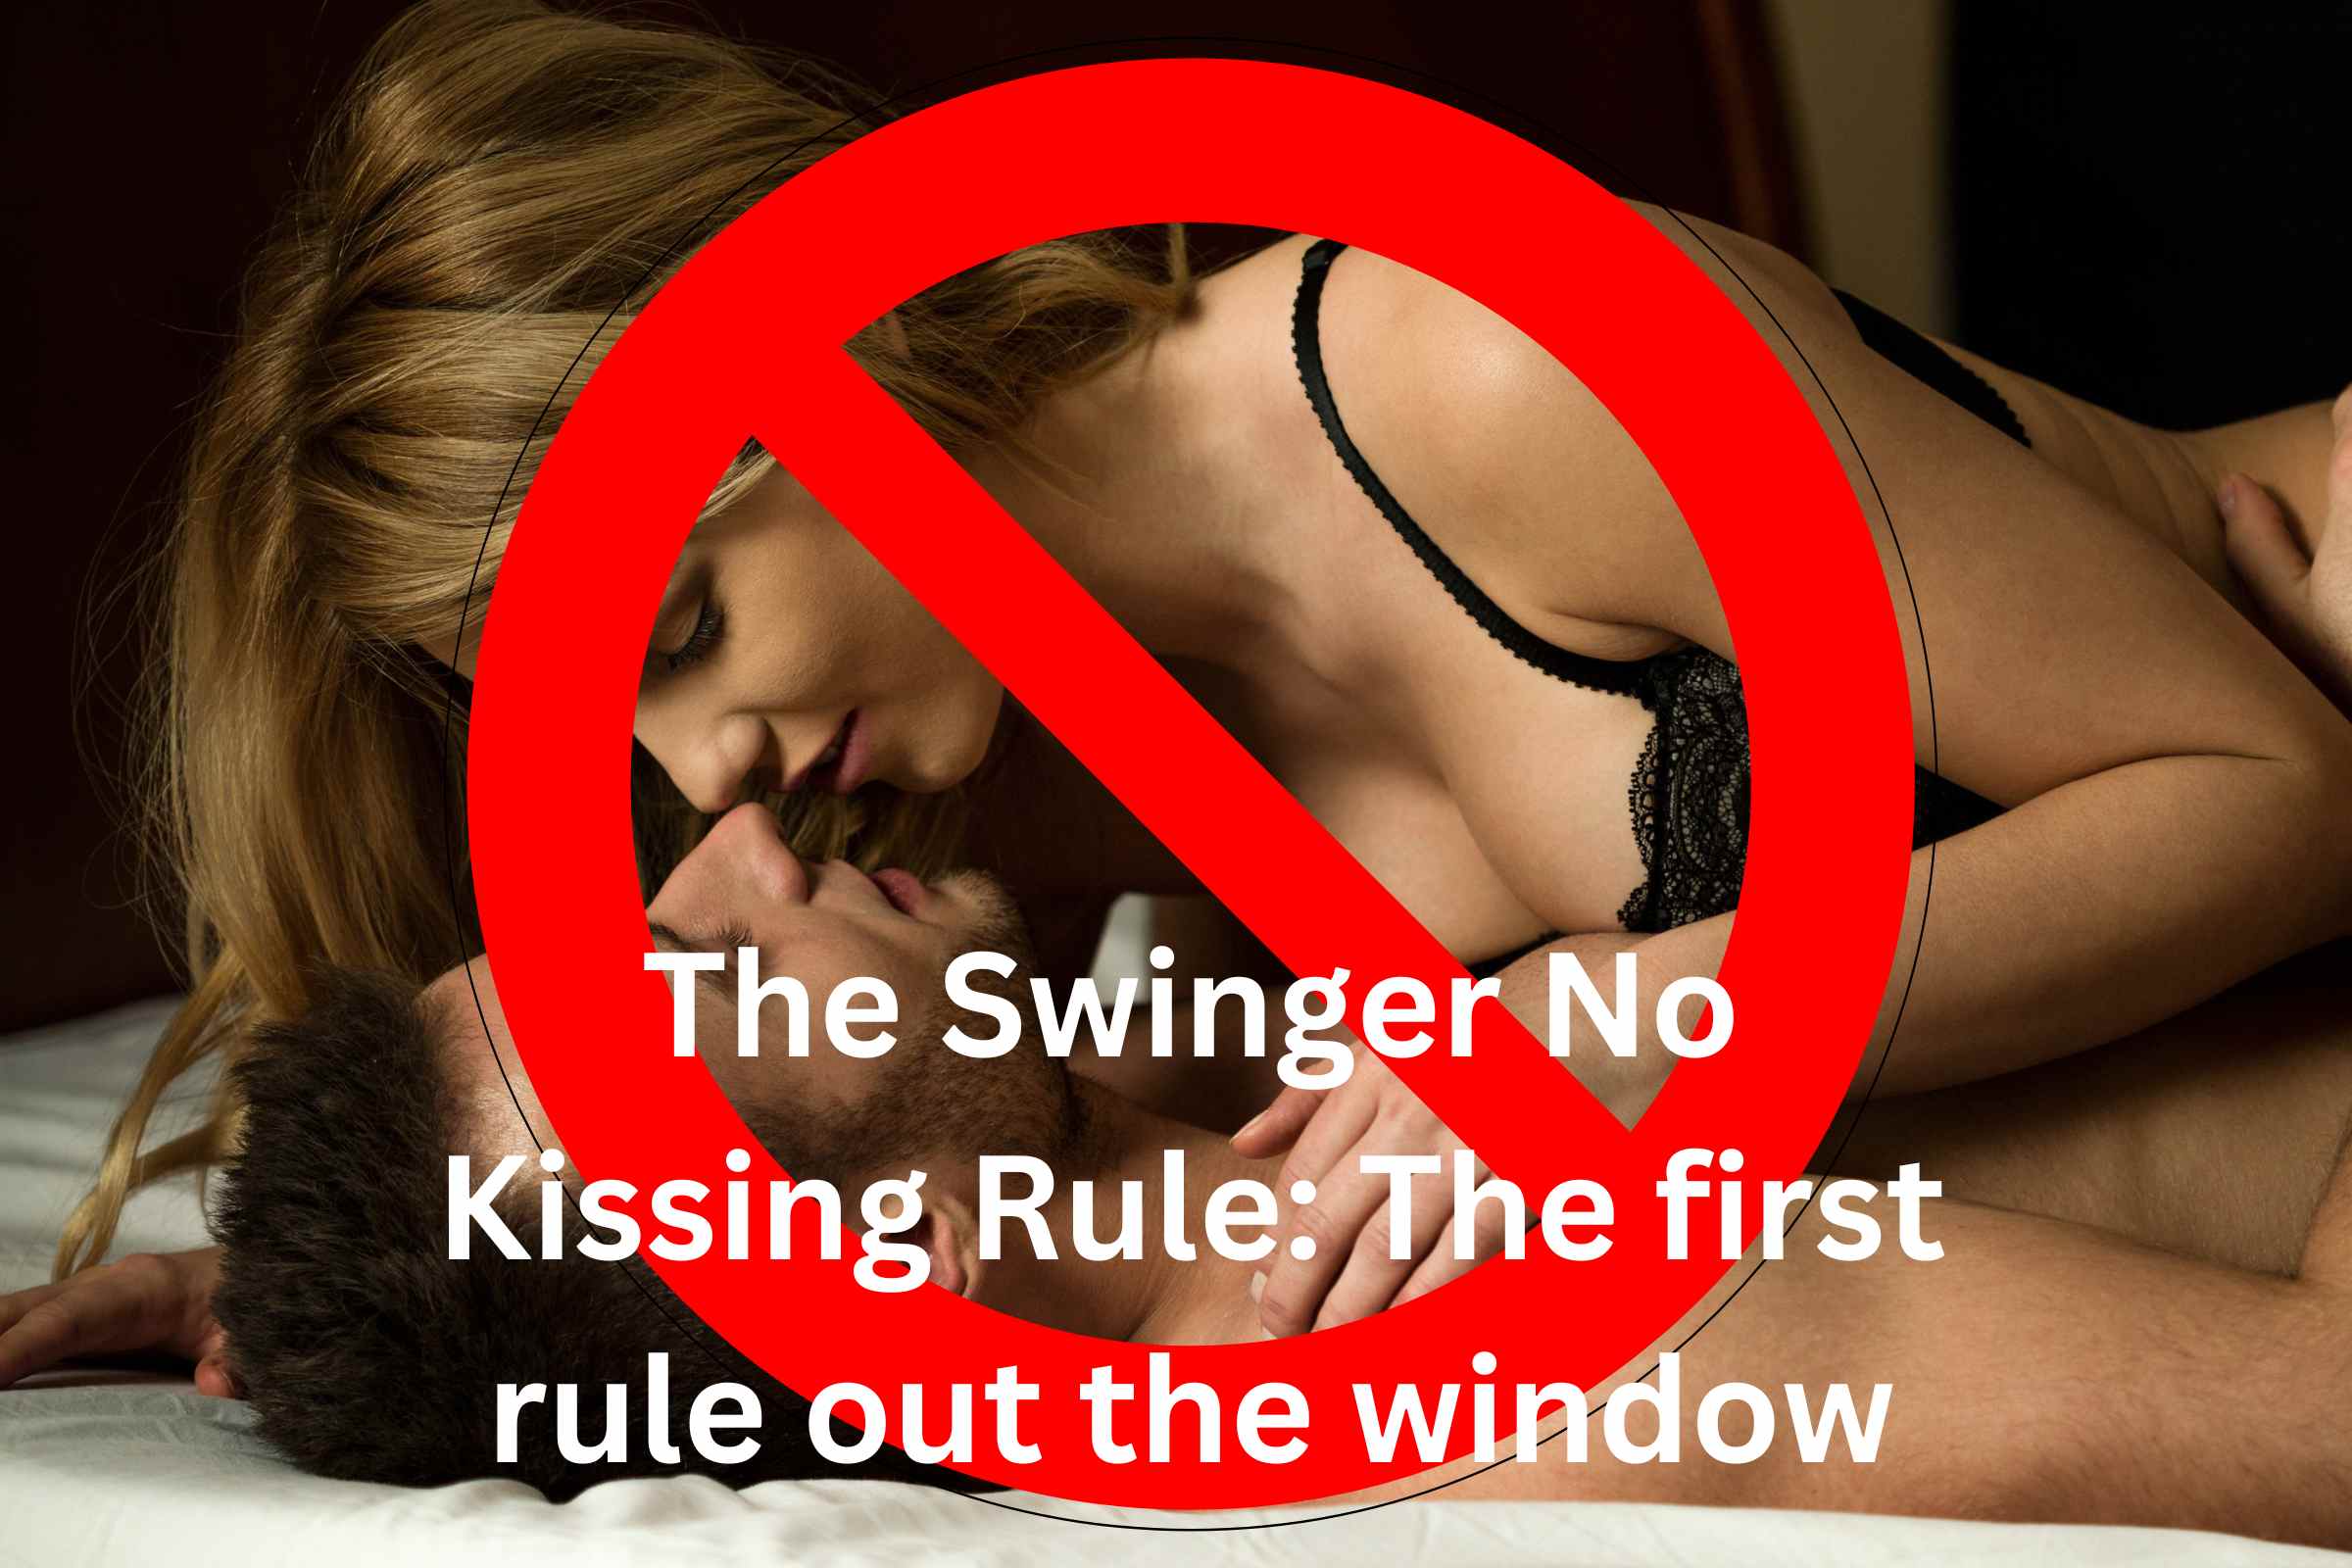 2023 The Swinger No Kissing Rule The first rule out the window picture